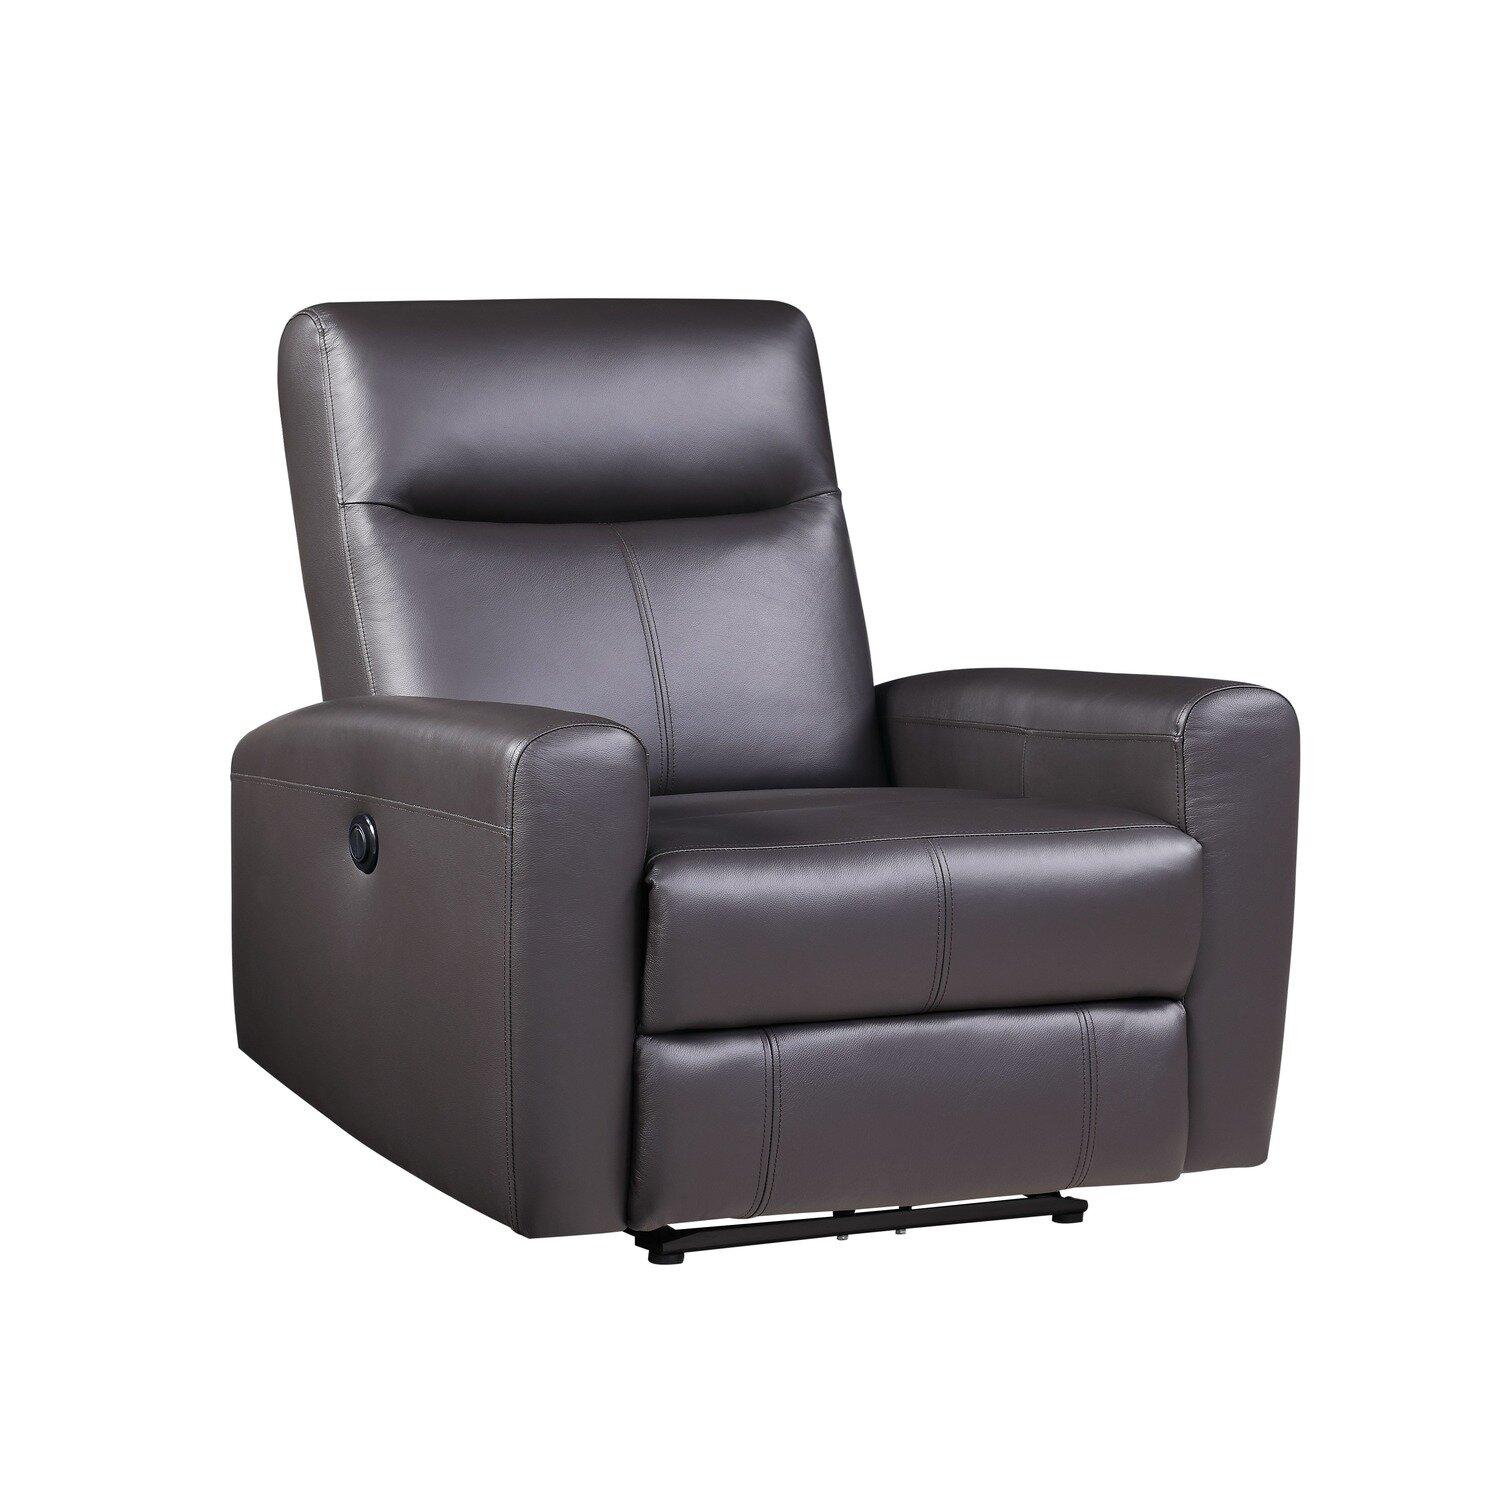 Contemporary Recliner Blane 59773 in Brown Top grain leather